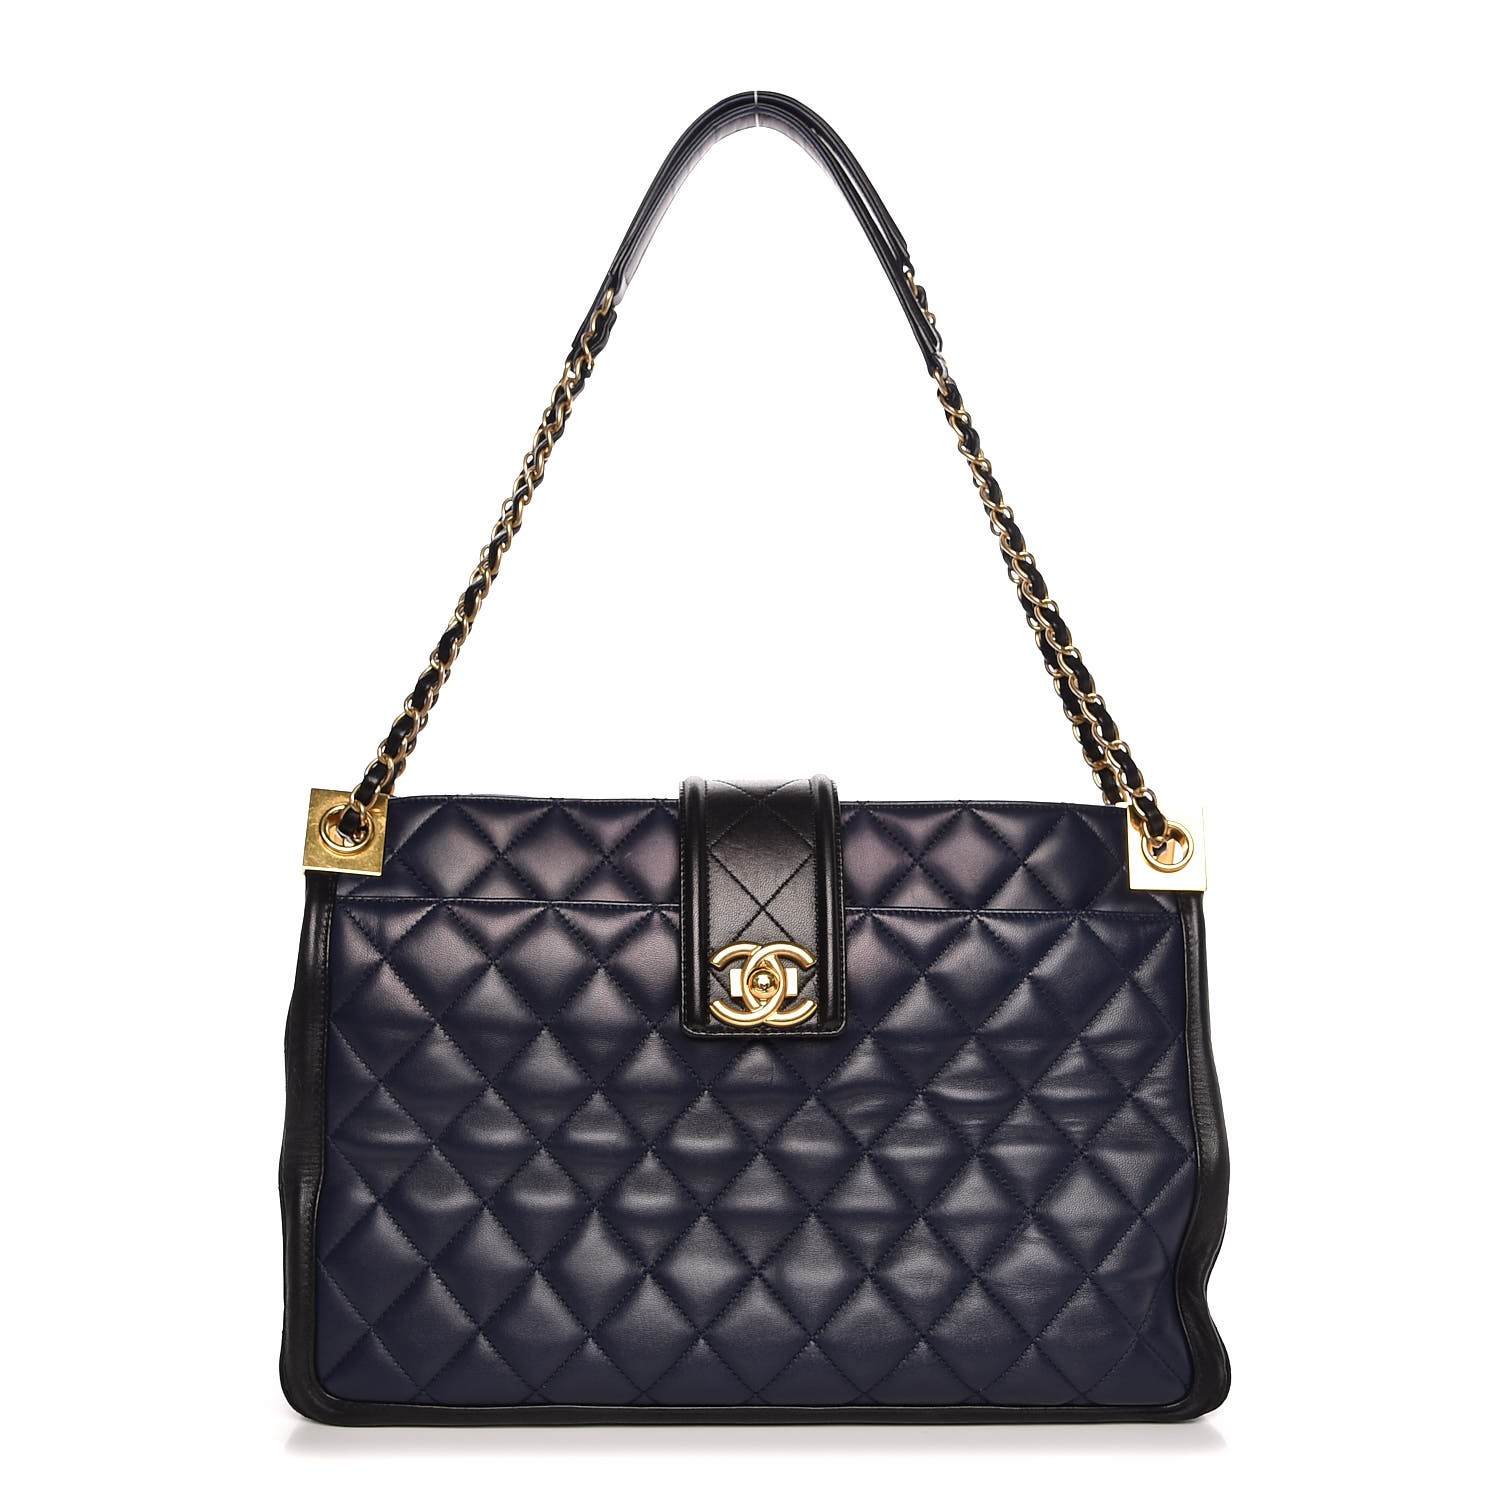 CHANEL Lambskin Quilted Elegant CC Shopping Tote Navy Black 333381